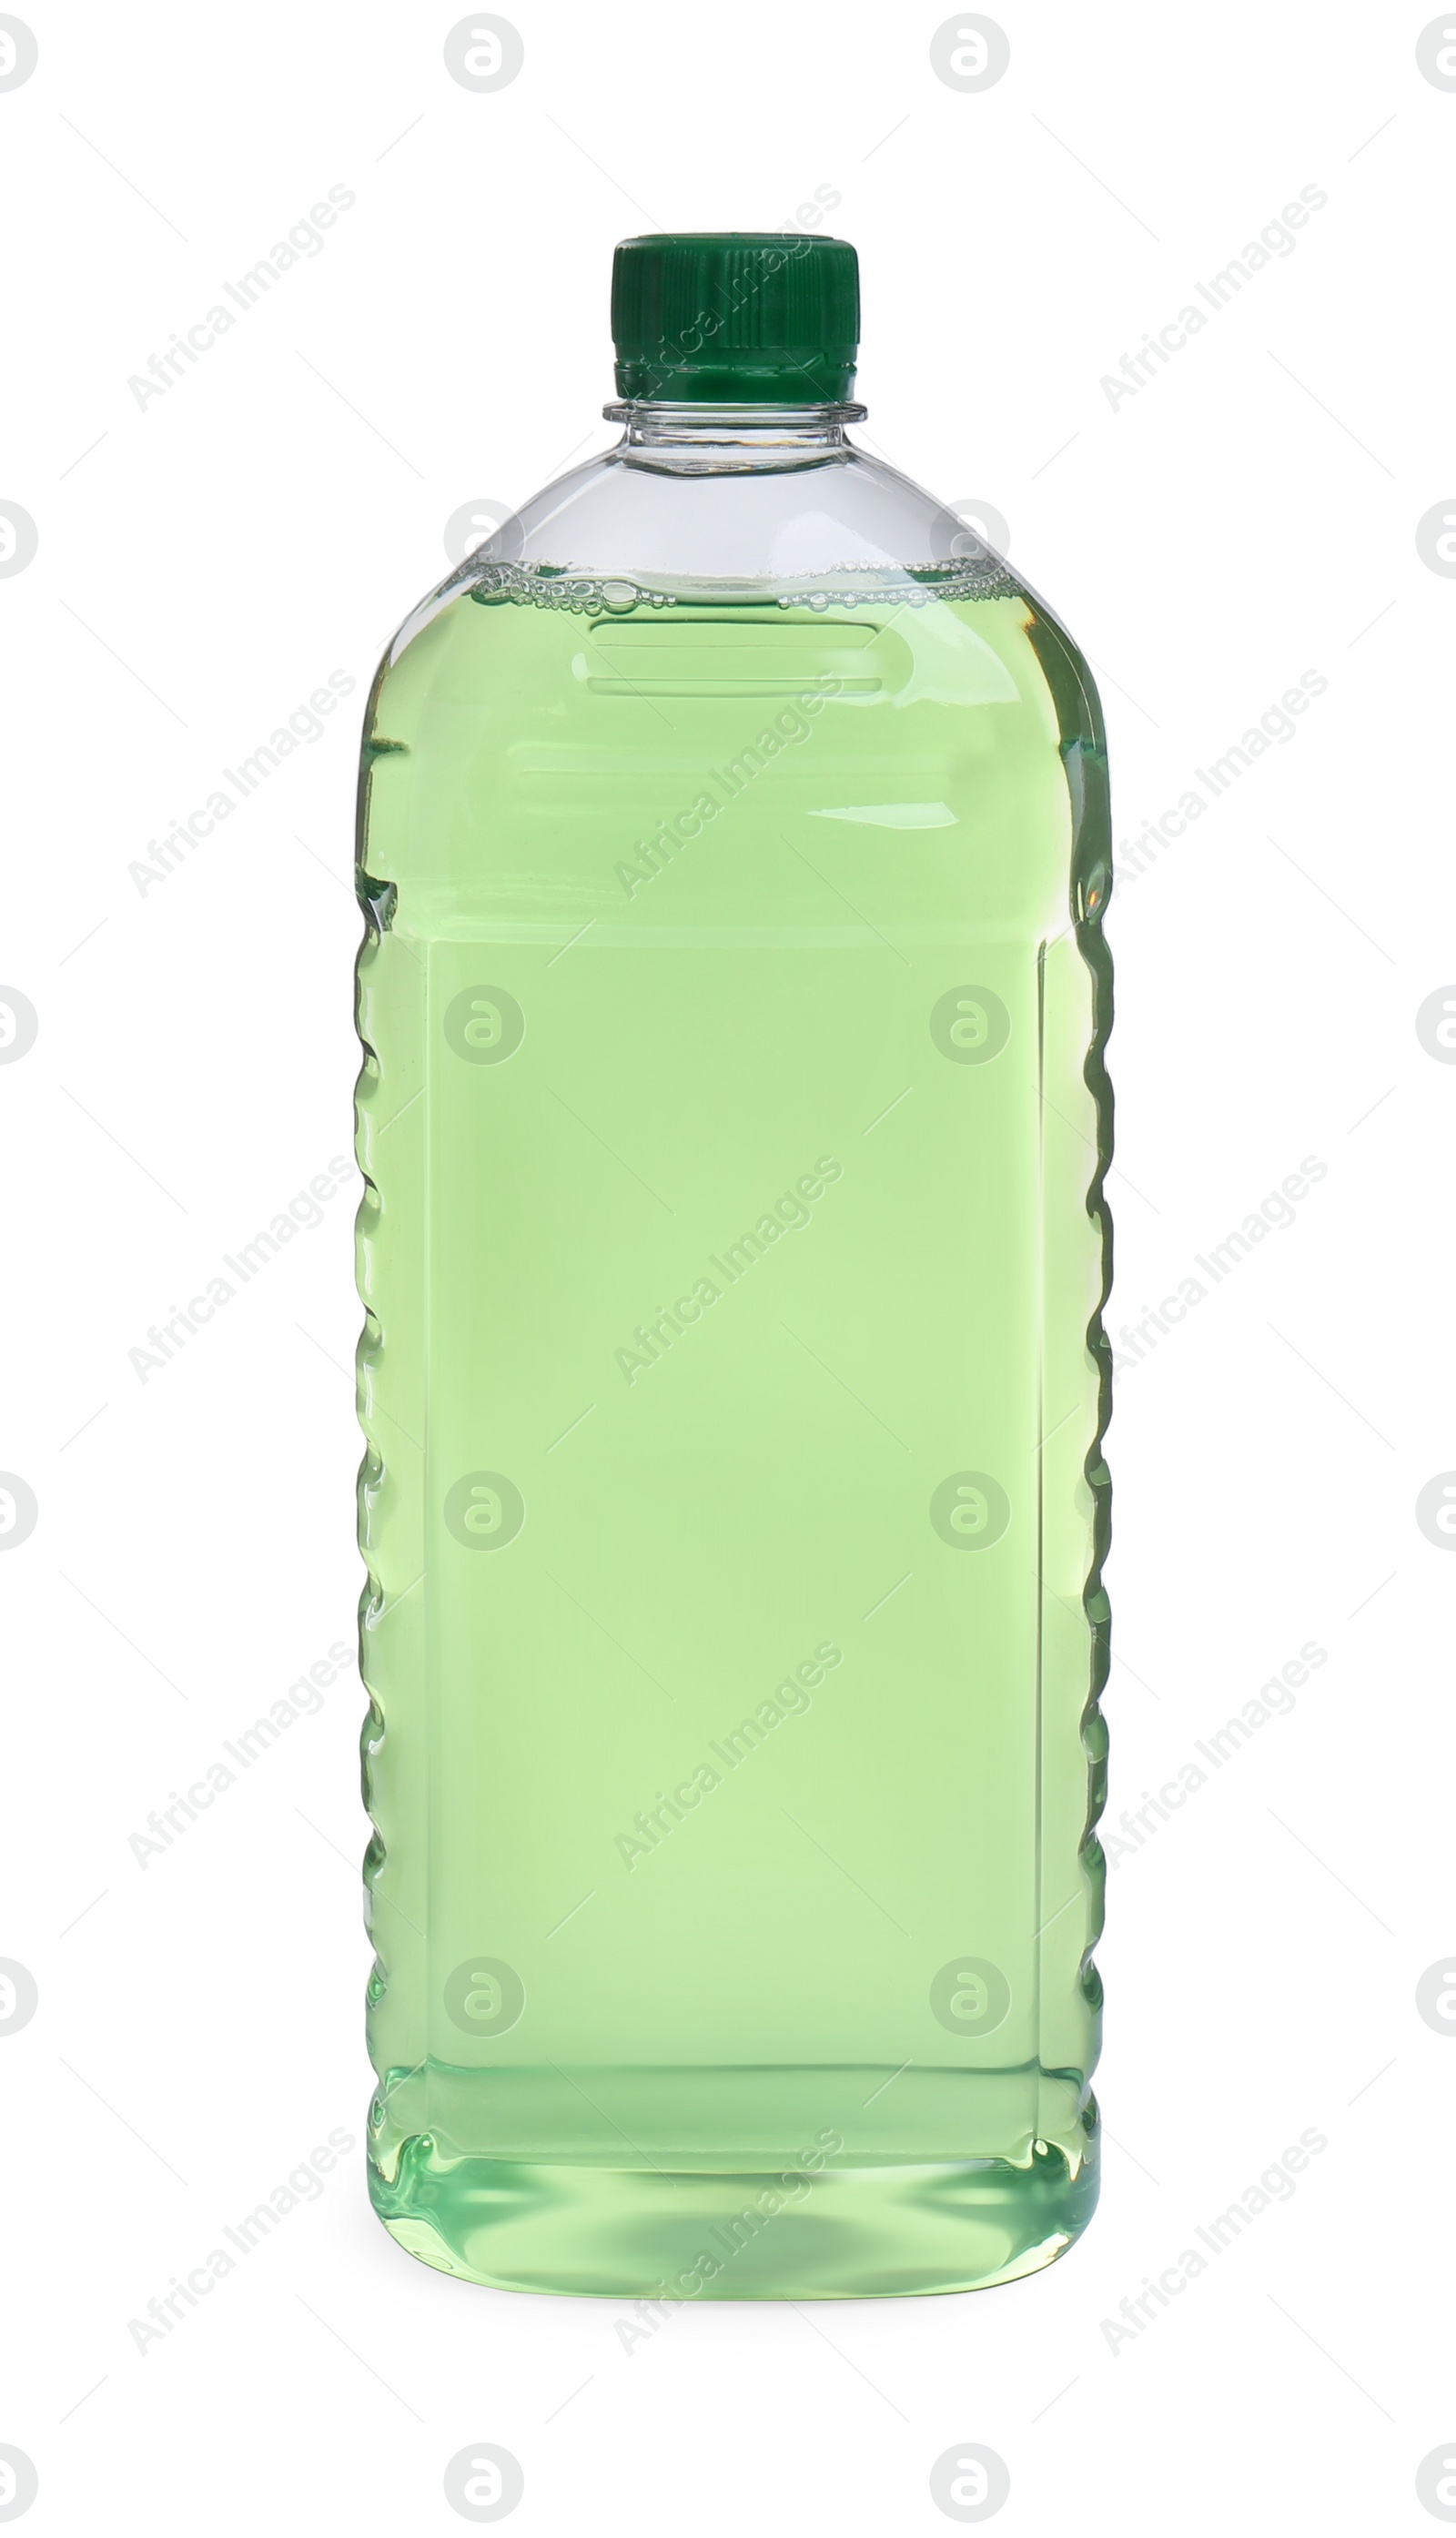 Photo of Blank bottle of car product isolated on white